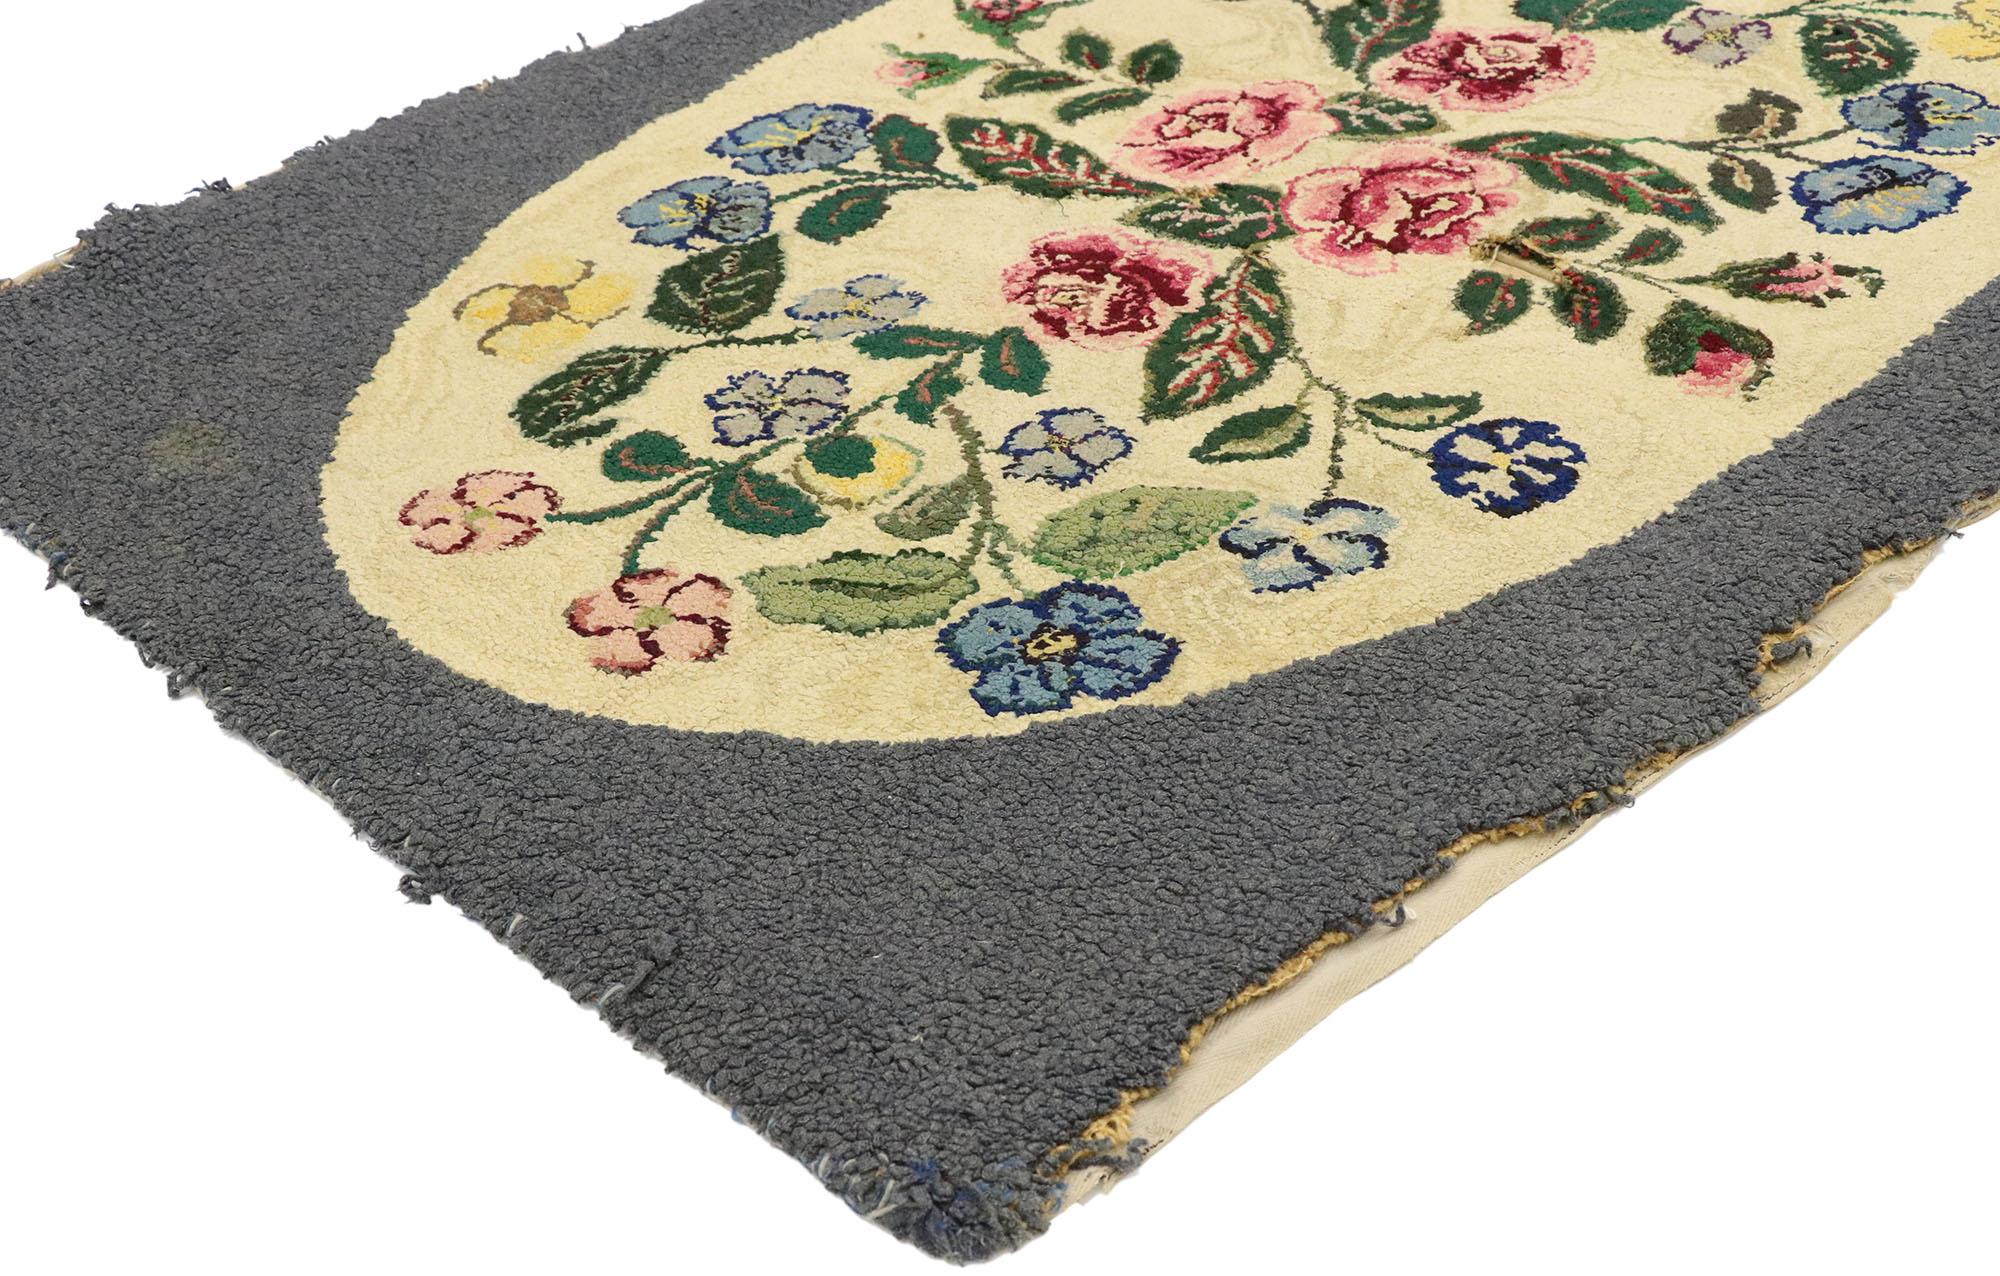 74352, antique American floral hooked rug with English Chintz style. Drawing inspiration from Mario Buatta, Chintz style and design elements from the 18th century in France, this antique American floral hooked rug with French Aubusson style will